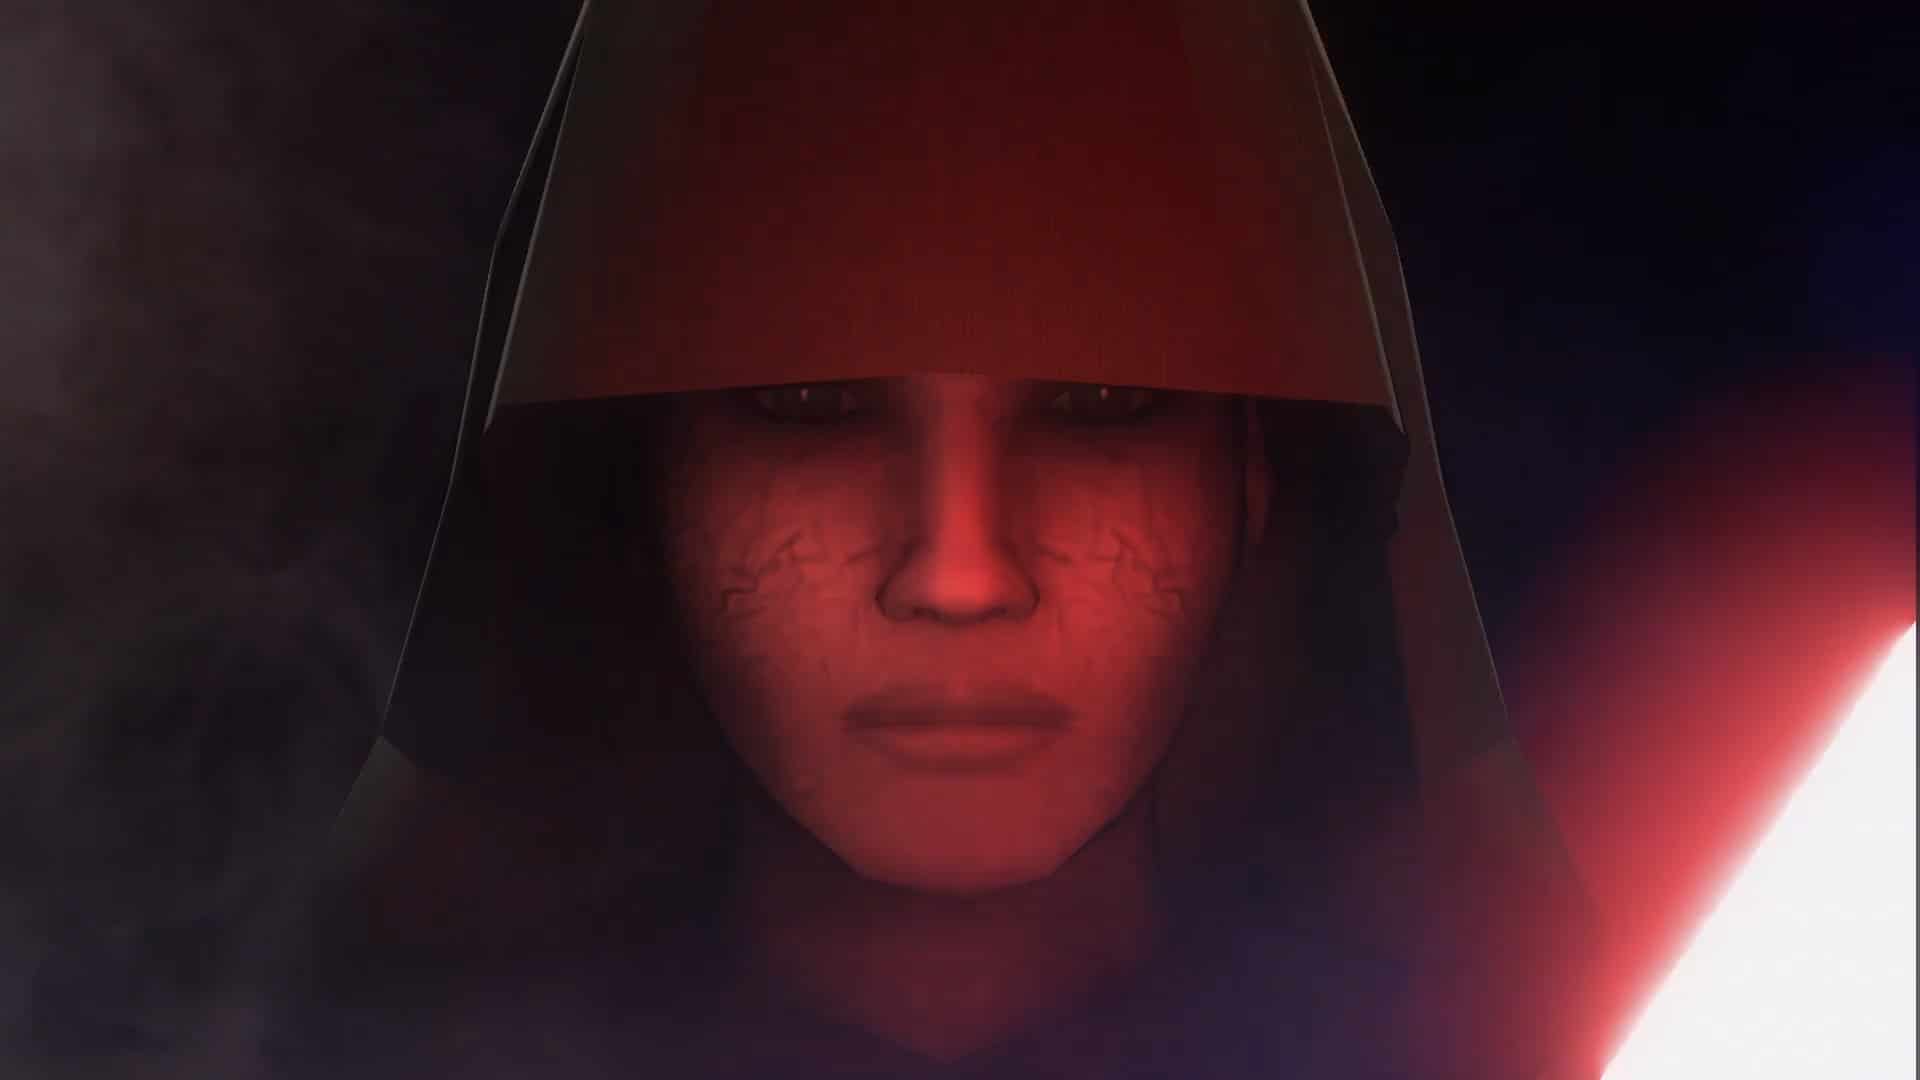 KotOR 2: The Sith Lords: The switch implementation in the trailer